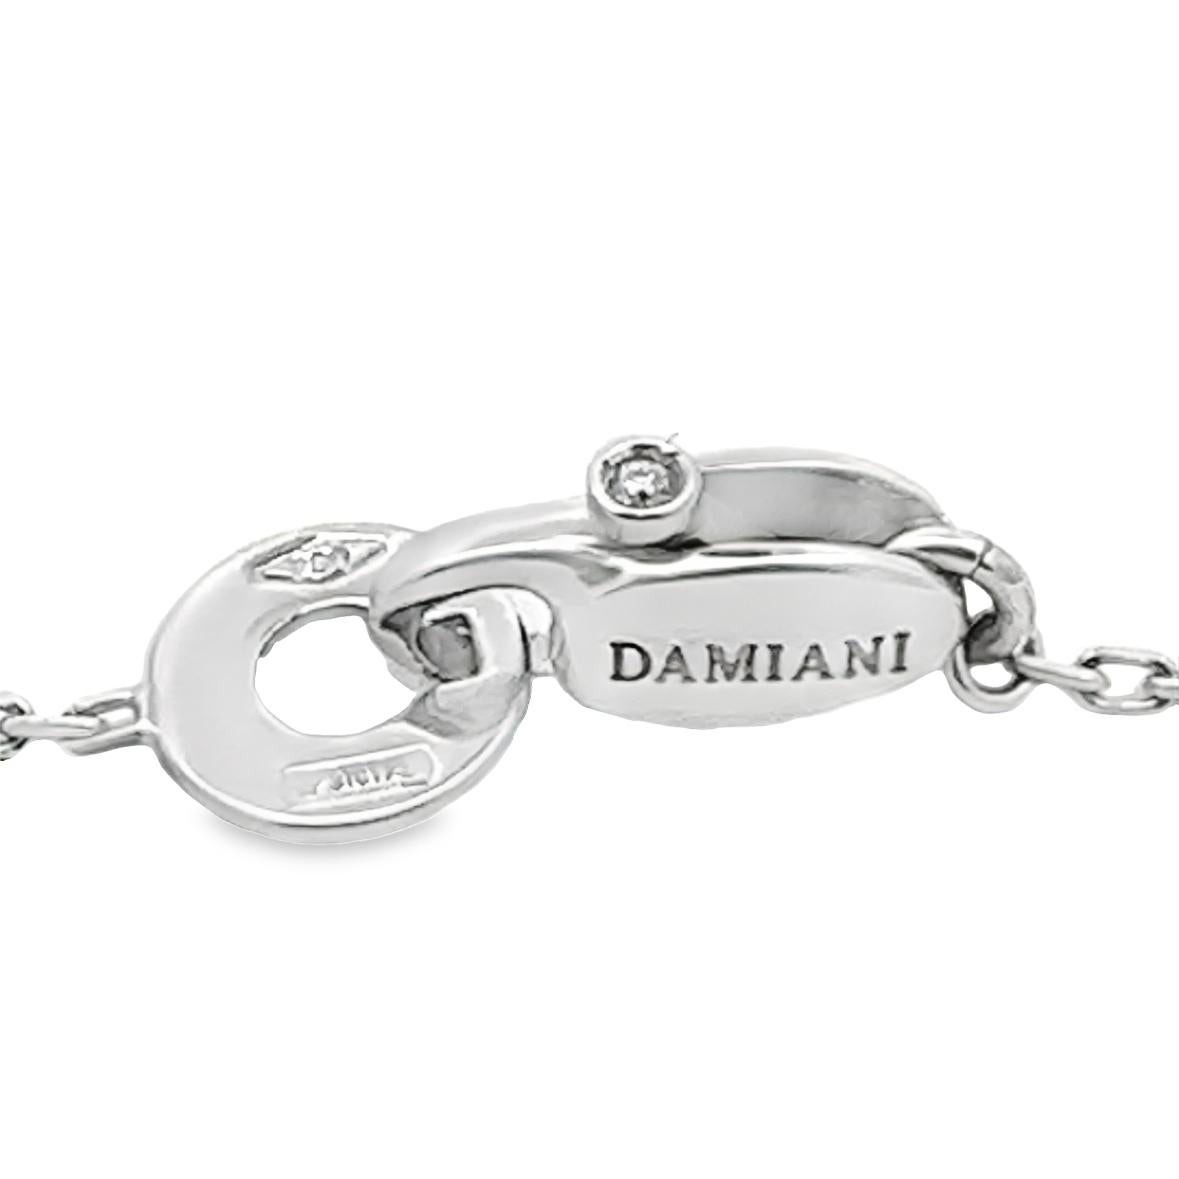 Damiani 18K White Gold Diamond Necklace In New Condition For Sale In Newton, MA